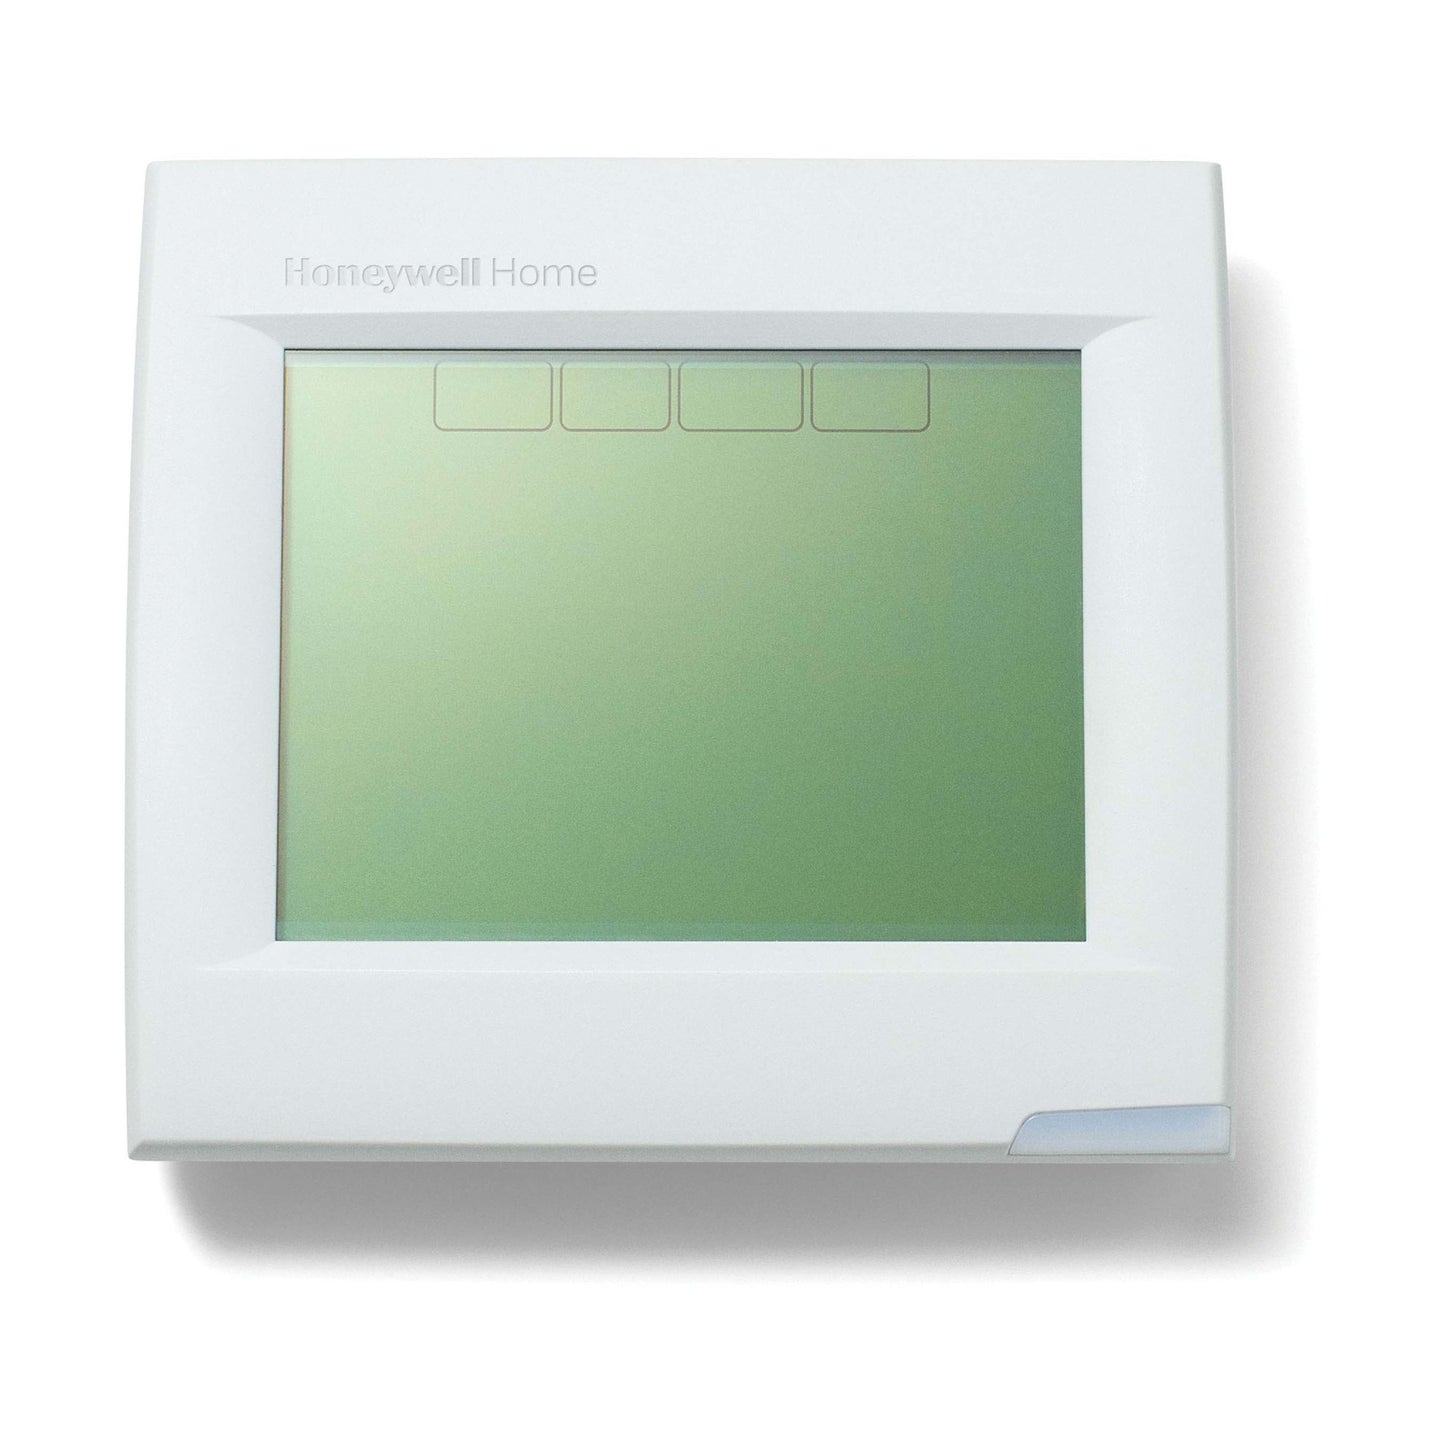 Honeywell TH8110R1008 - Vision PRO 8000 with RedLINK Technology Single Stage Thermostat